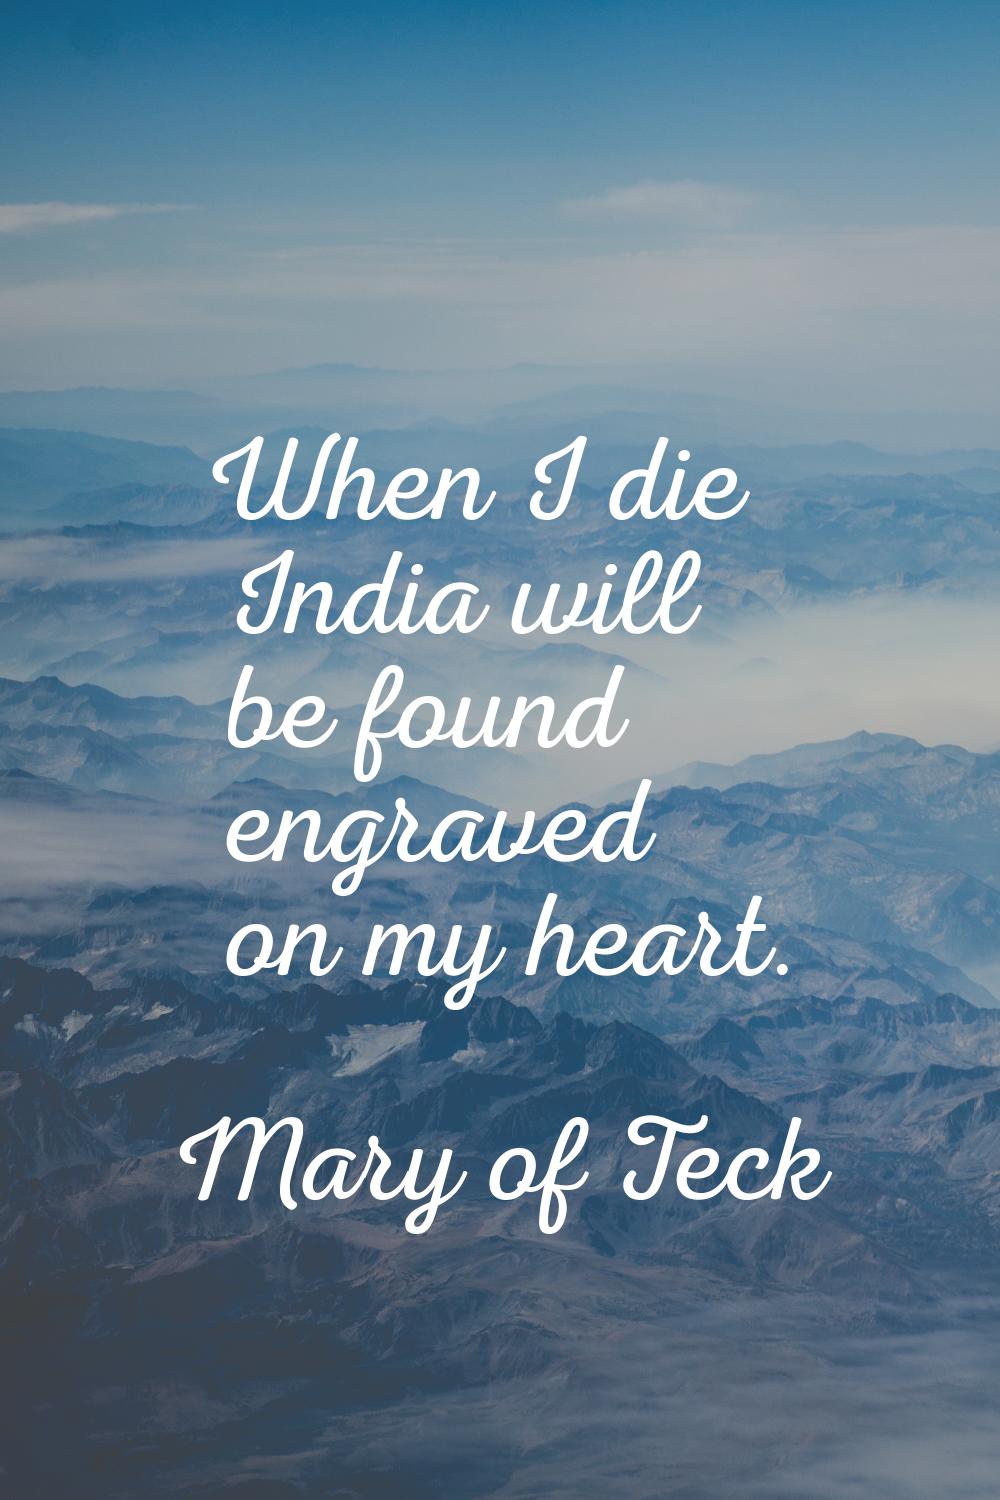 When I die India will be found engraved on my heart.